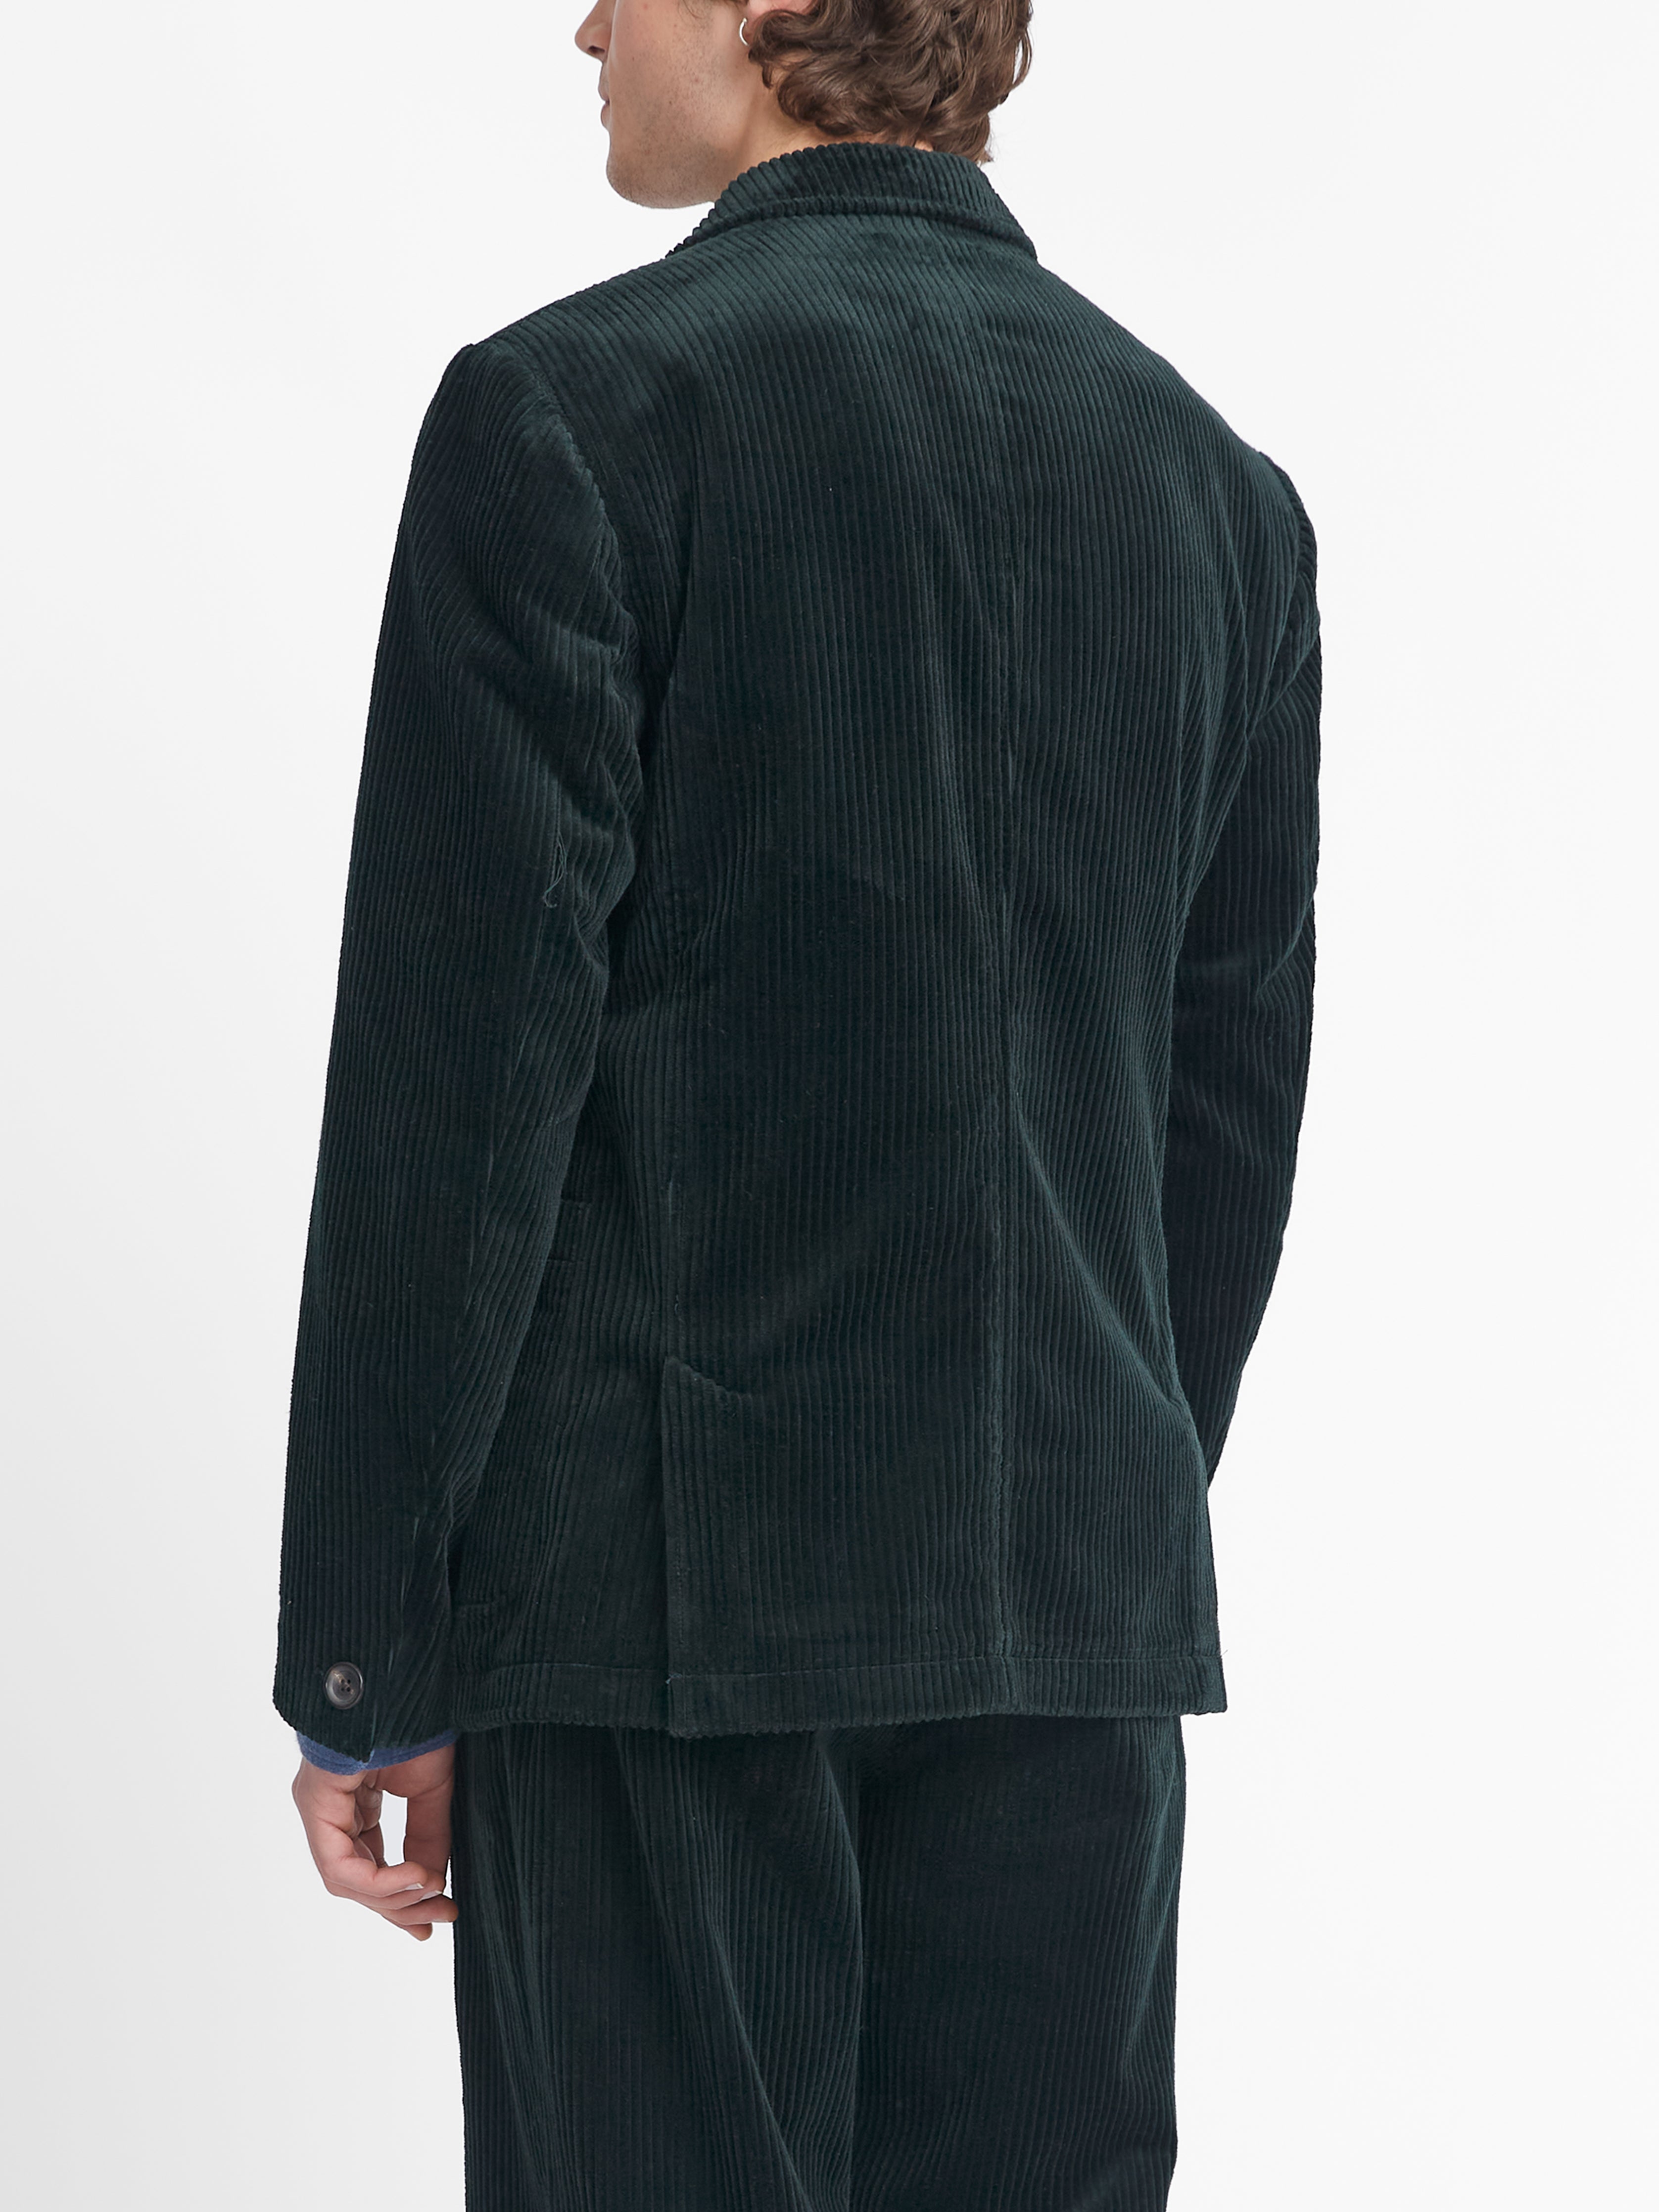 Green Melrose Cord Mansfield Suit